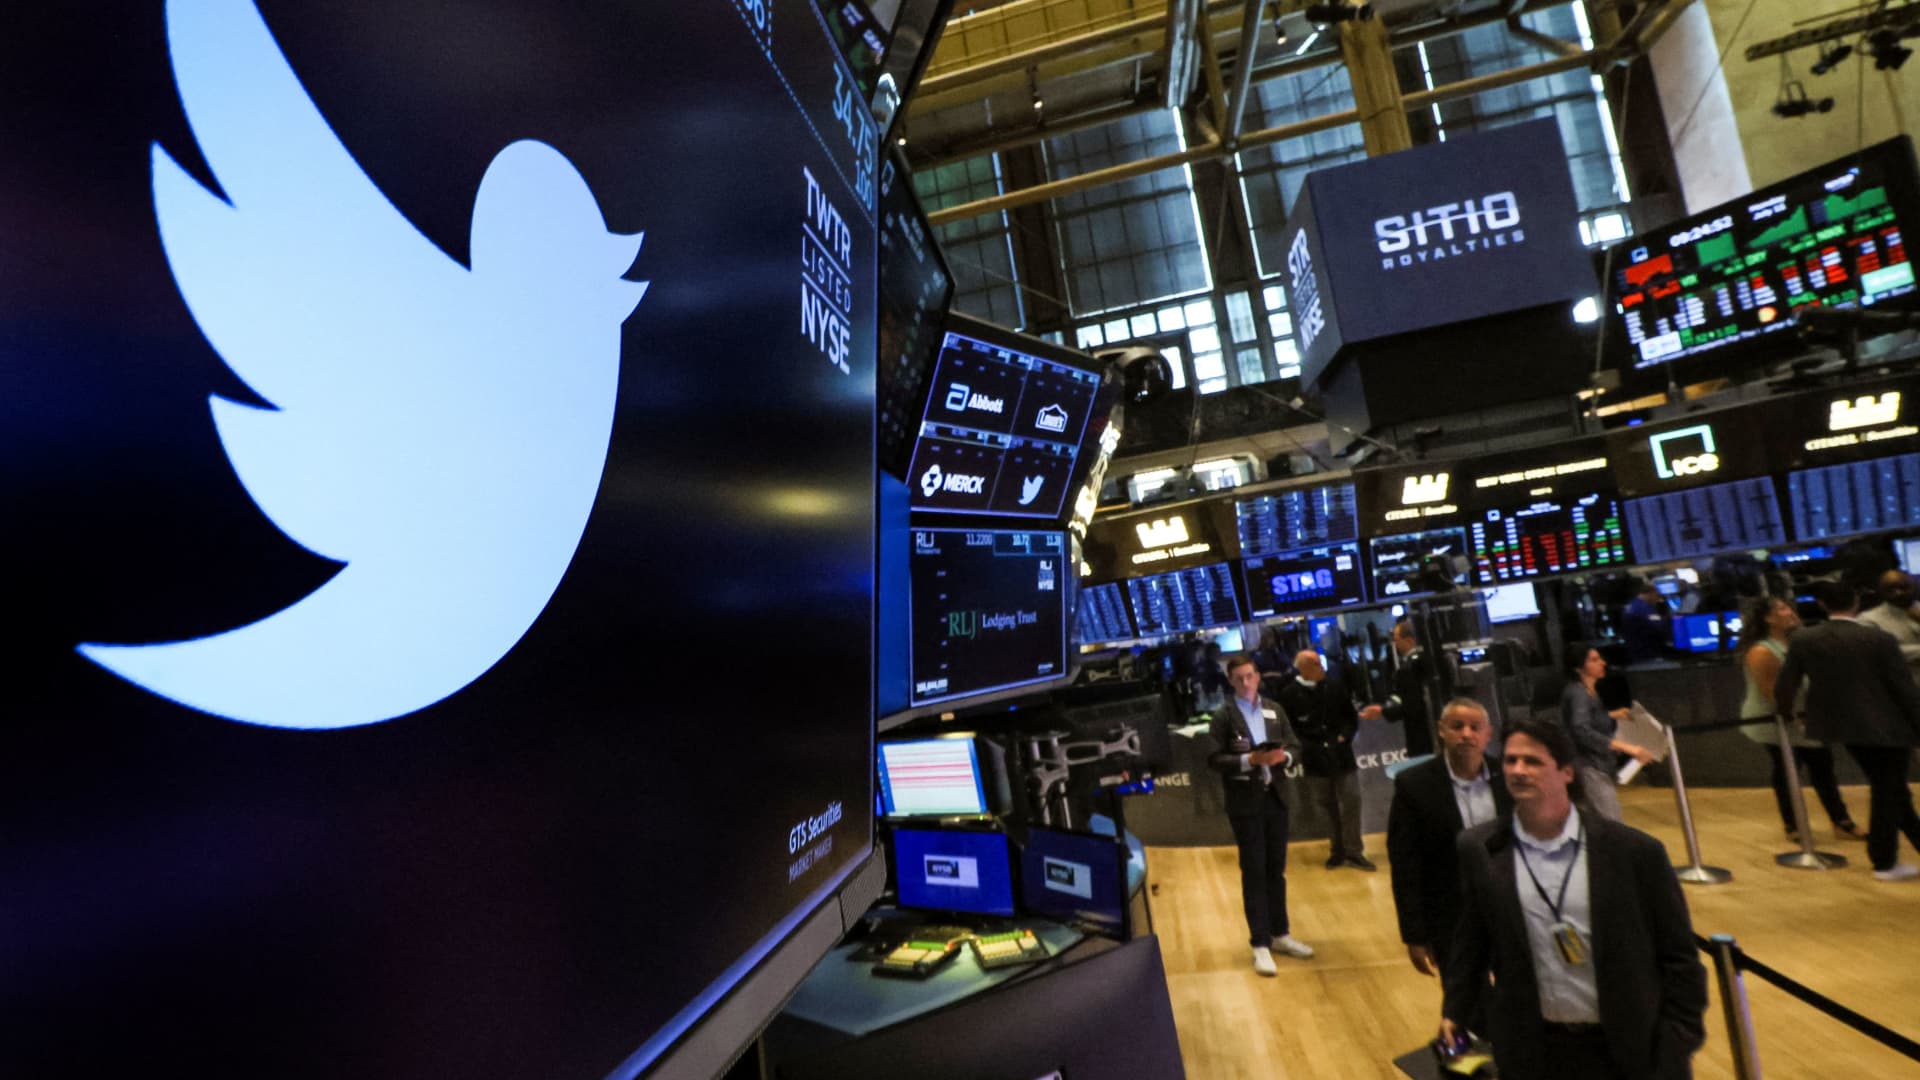 Stocks making the biggest moves midday: UiPath, Coupa Software, ChargePoint, Twitter and more